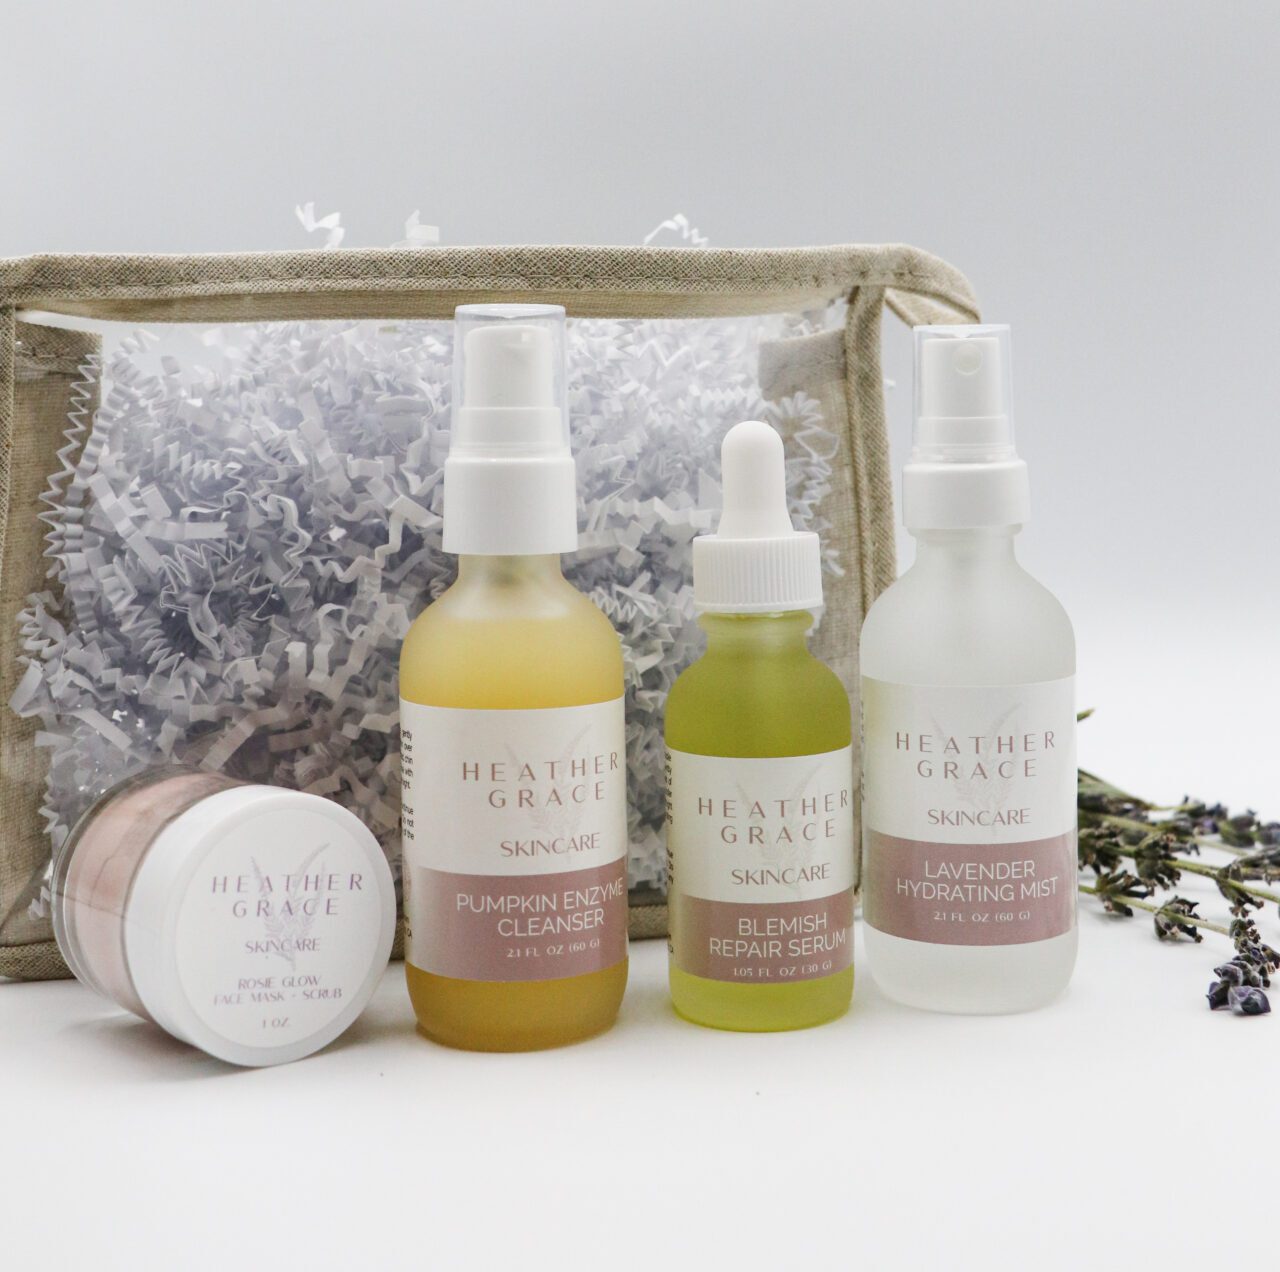 A collection of Heather Grace Skincare products displayed elegantly against a white backdrop. The set includes a 'Pumpkin Enzyme Cleanser', a 'Blemish Repair Serum', and a 'Lavender Hydrating Mist'. Beside them is a white jar labeled 'Rose Glow Face Mask & Scrub'. The products are accompanied by a rustic transparent pouch filled with white paper shreds and fresh sprigs of lavender scattered to the side.